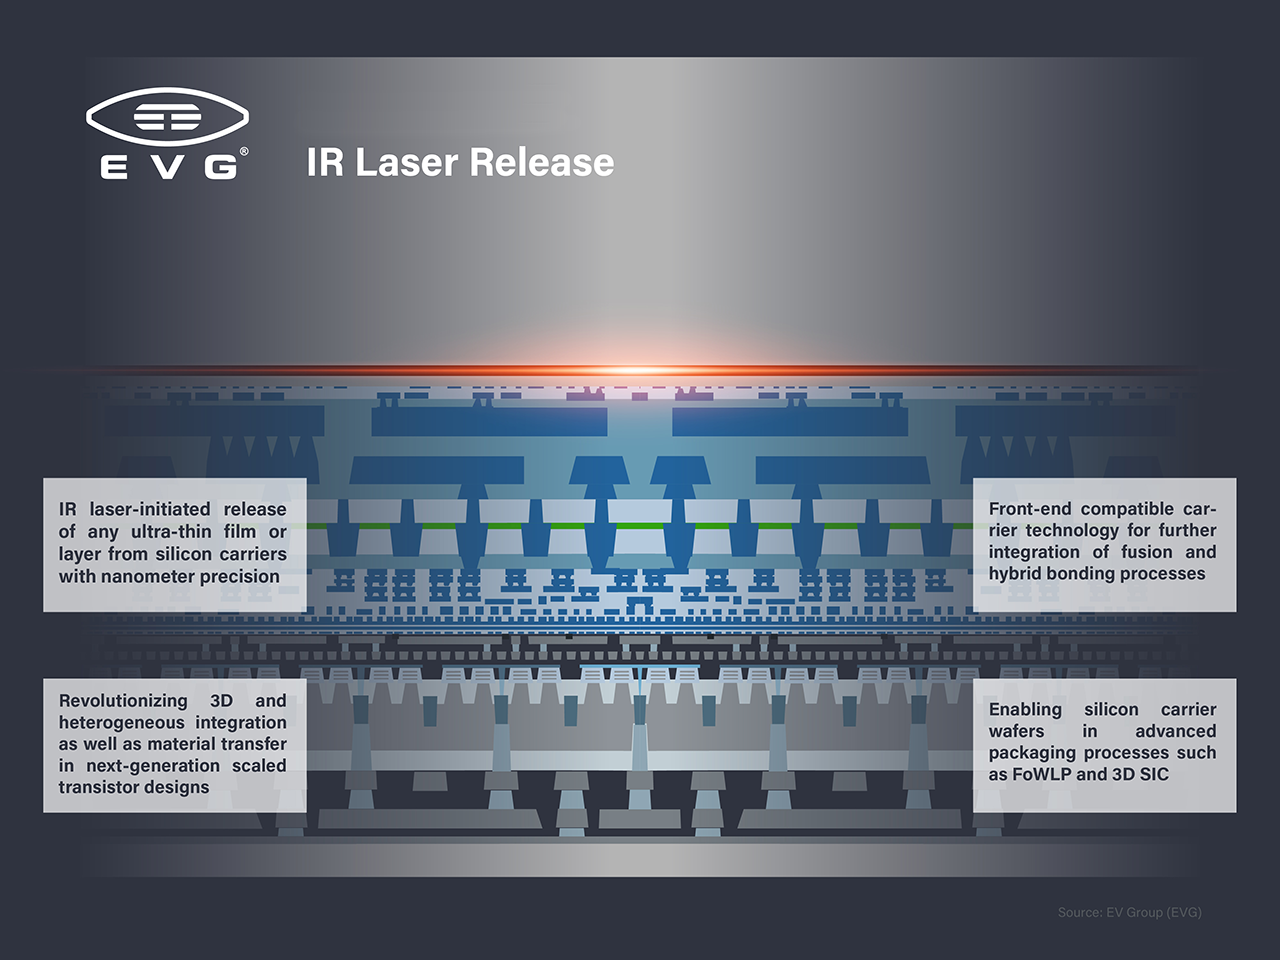 EV Group’s revolutionary layer release technology for silicon enables ultra-thin layer stacking for both semiconductor front-end processing and advanced packaging applications. Source: EV Group